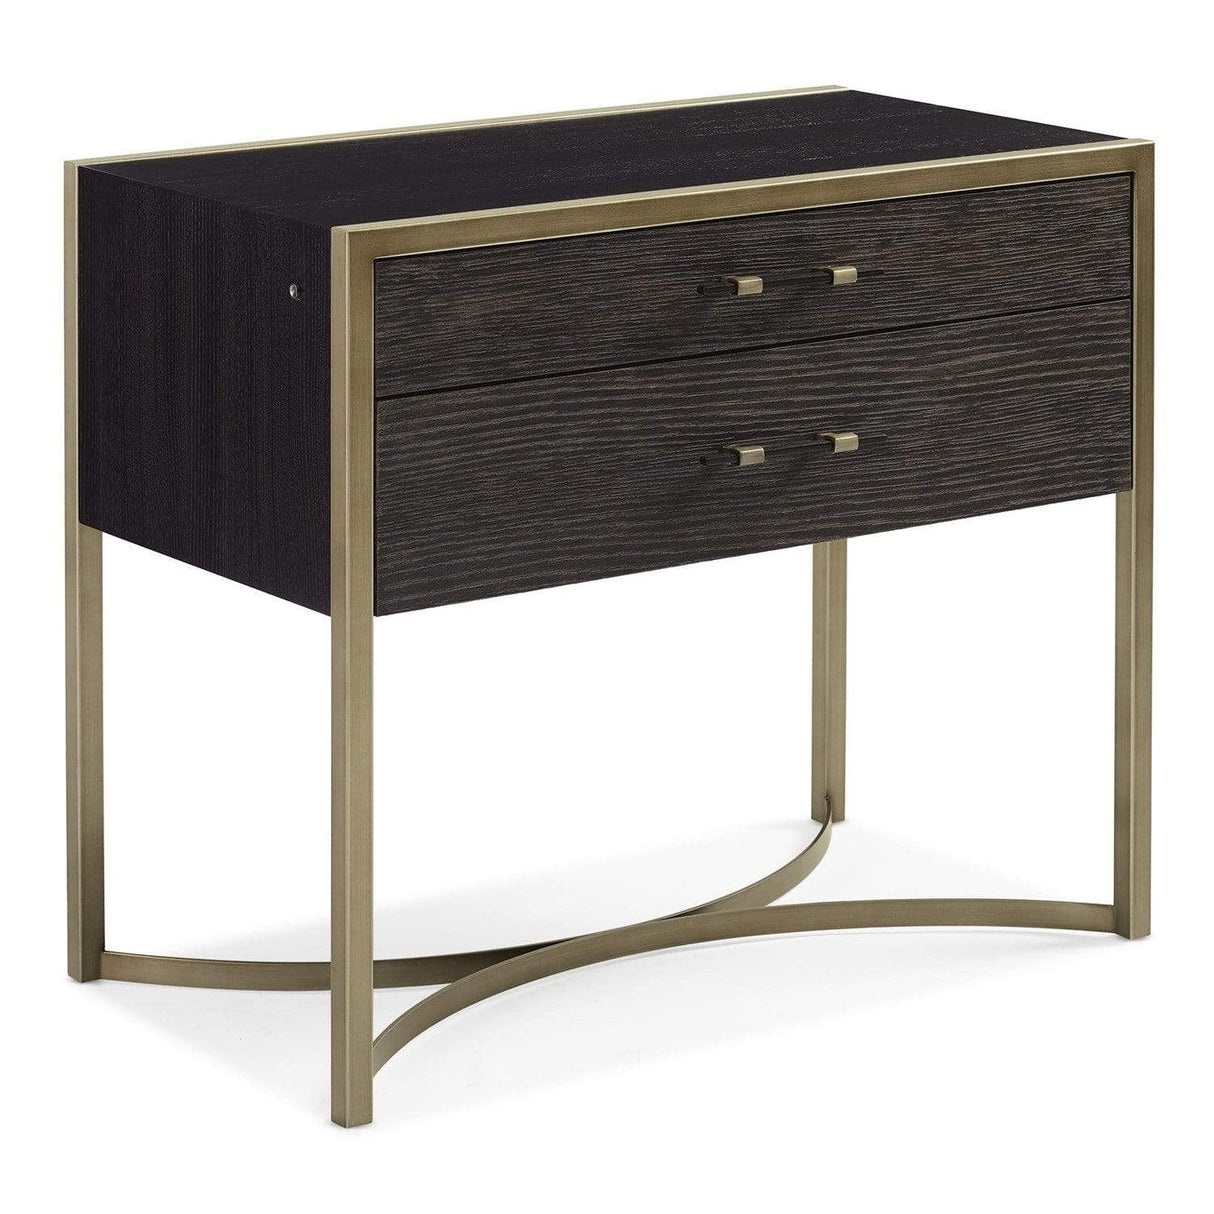 Caracole ReMix Large Nightstand Furniture caracole-M113-019-061